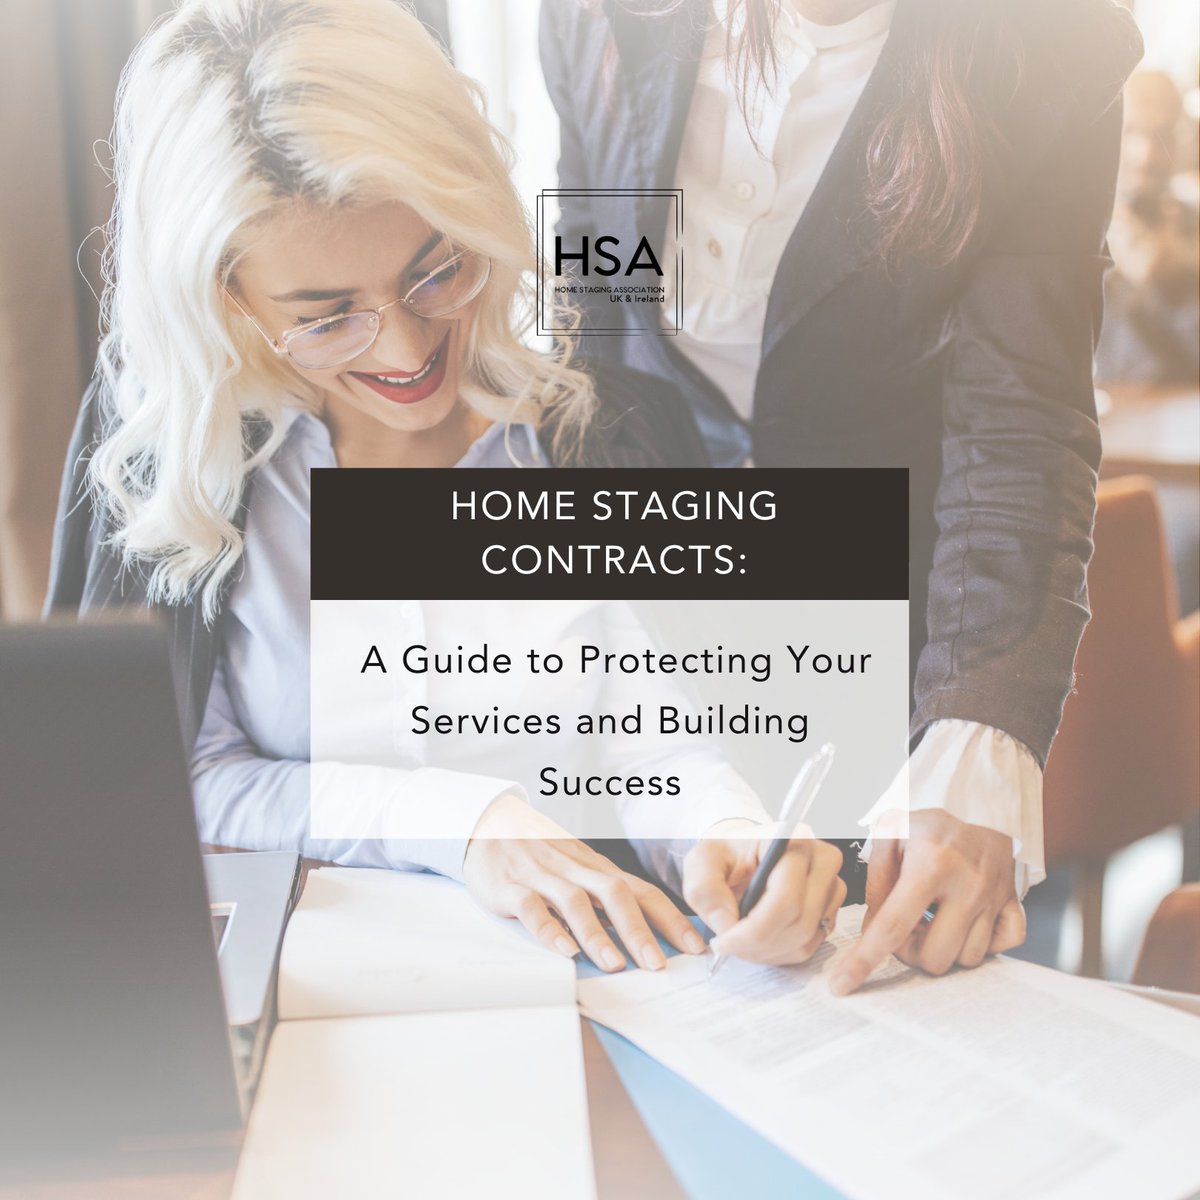 Home Staging Contracts: Visit our Facebook and Instagram pages for our tips!

#homestagingtips #homestagingbusiness #businesscontract #homestagingcontract #homestaginguk #homestagingireland #hsauk